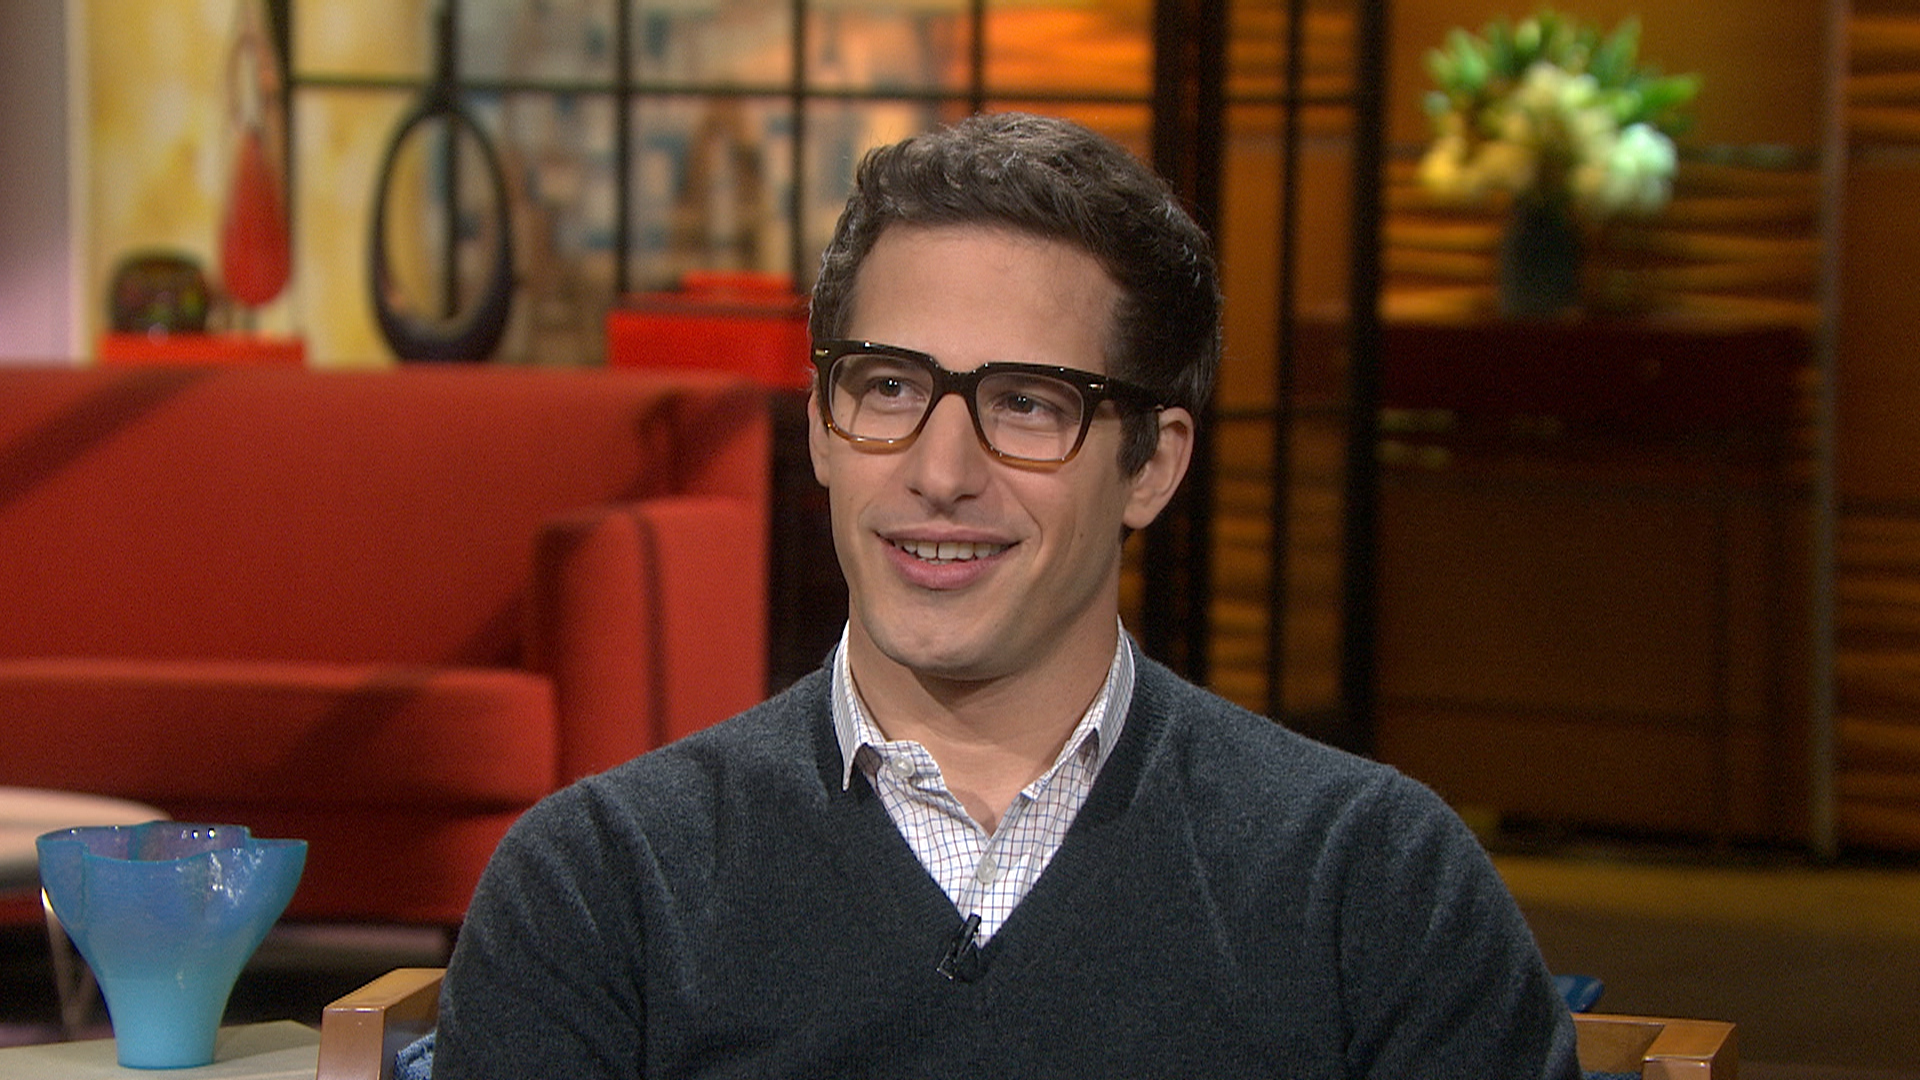 Andy Samberg still reeling from Golden Globe win: 'It's about as